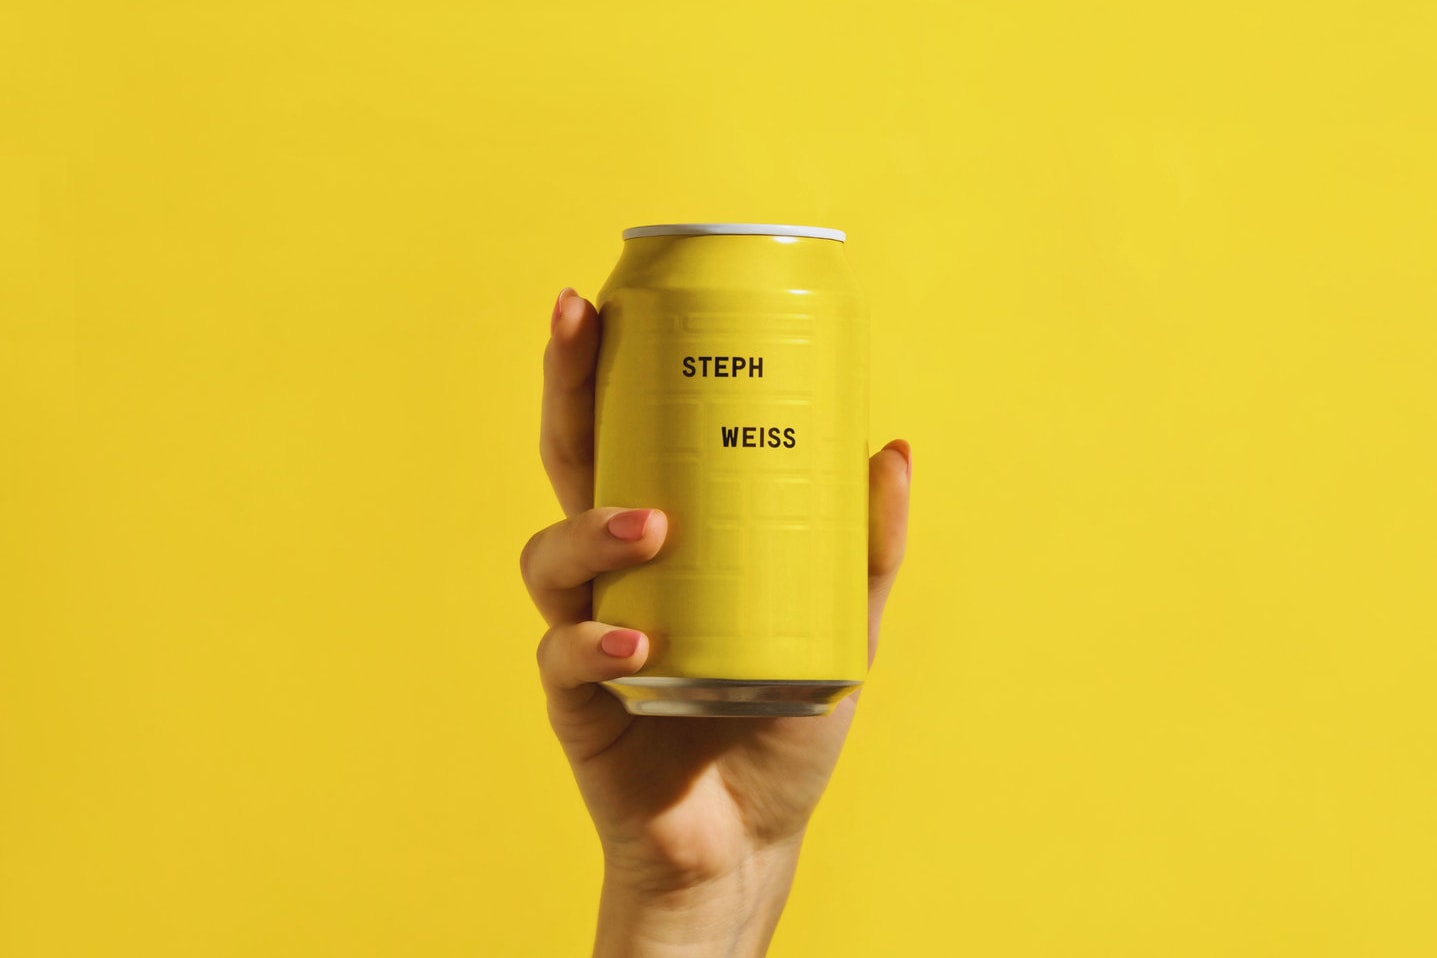 AND UNION Modern Minimalist Design Beer Cans